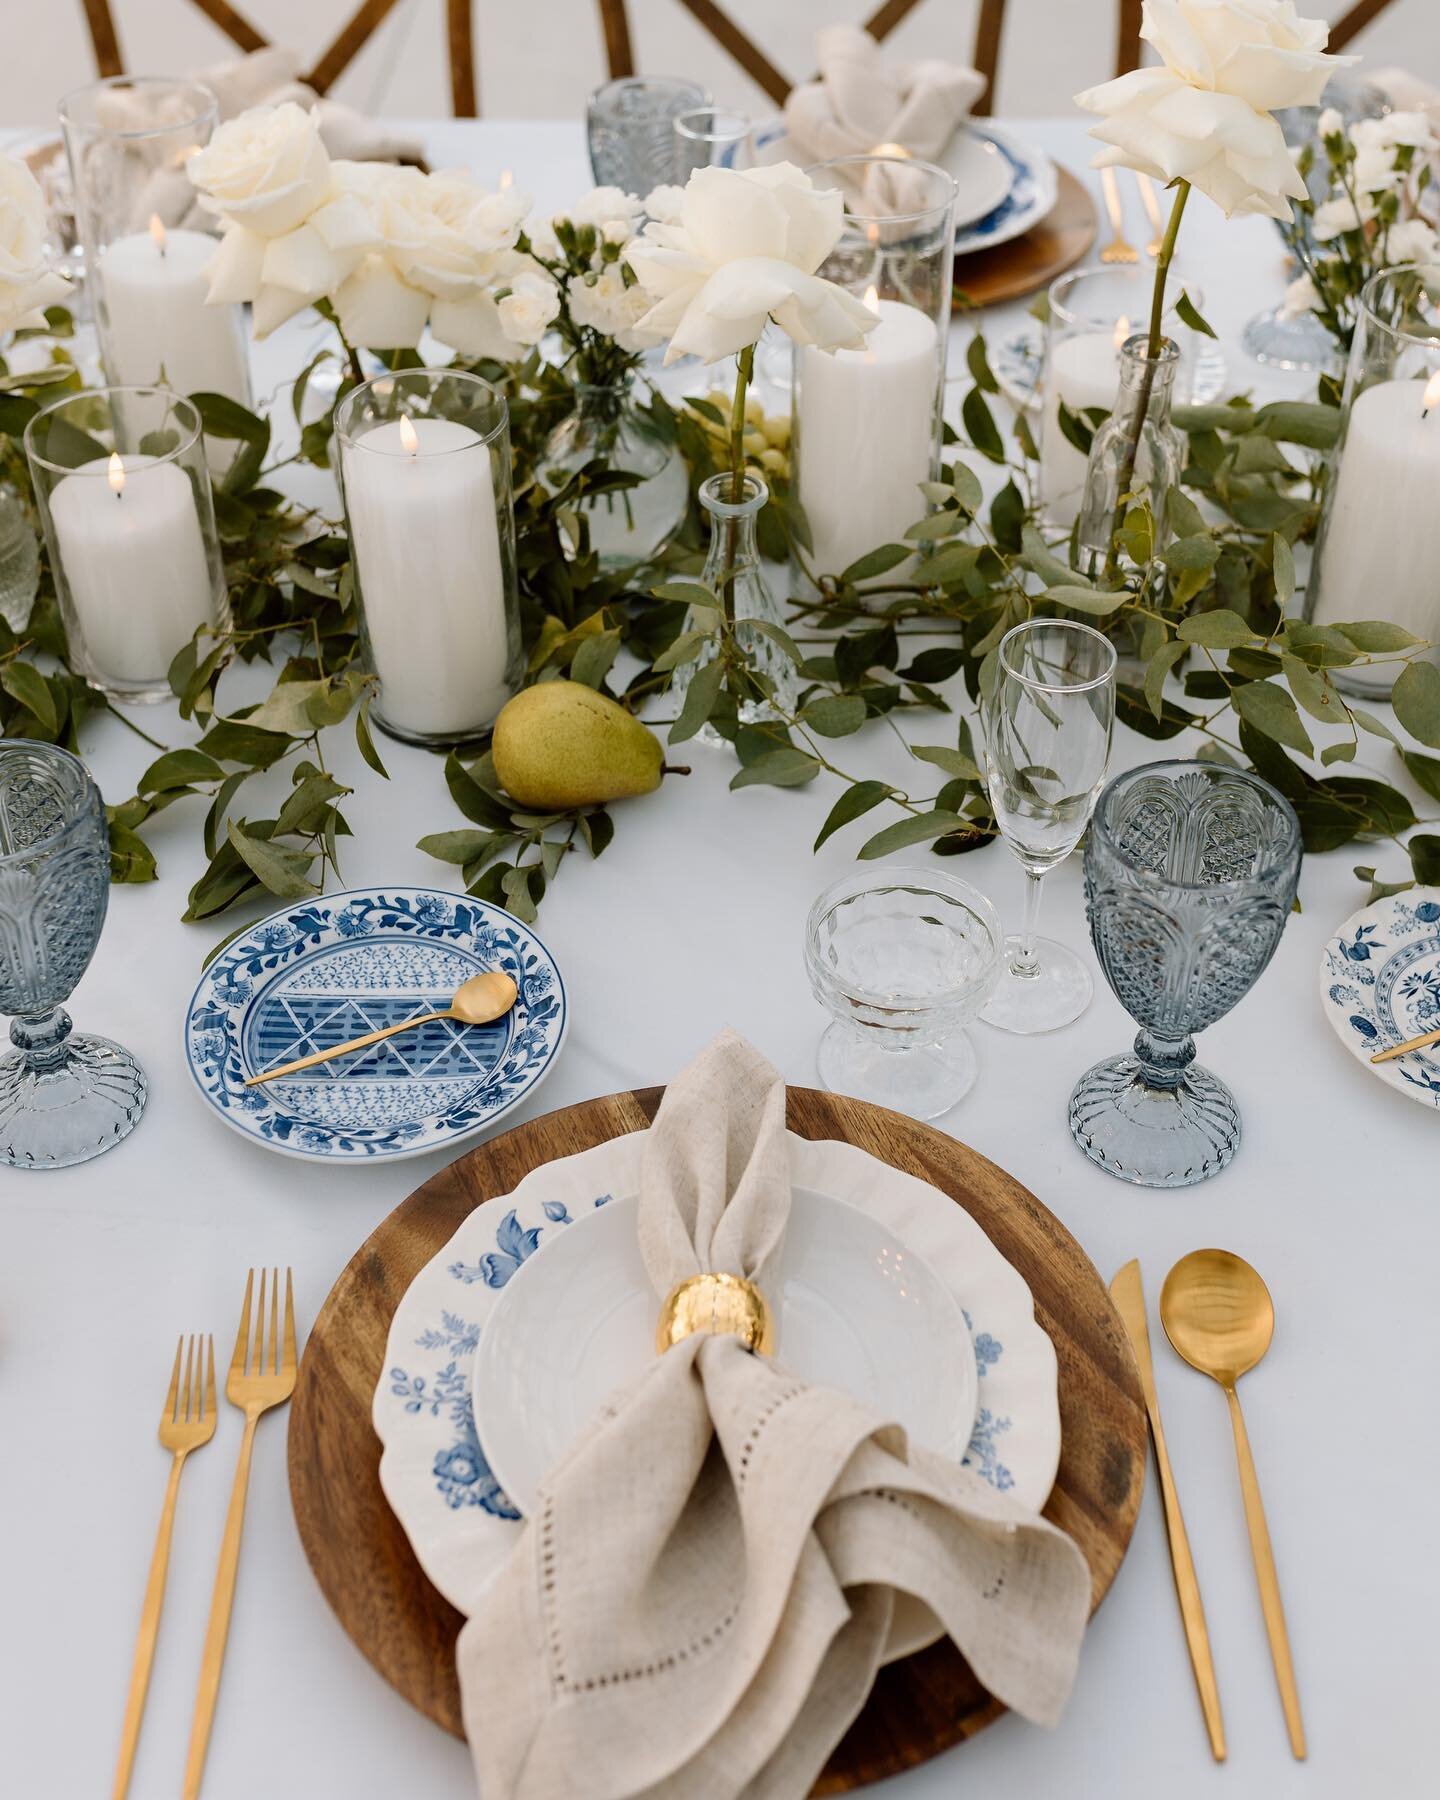 This week has been full of new inquires and client meetings! So excited for 2024 and all of the colorful weddings 💙

Planning + Design - @wild.magnolia.weddings 
Photographer - @christinsofkaphotography 
Venue - @lilly_lous_venue
Table Setting Renta